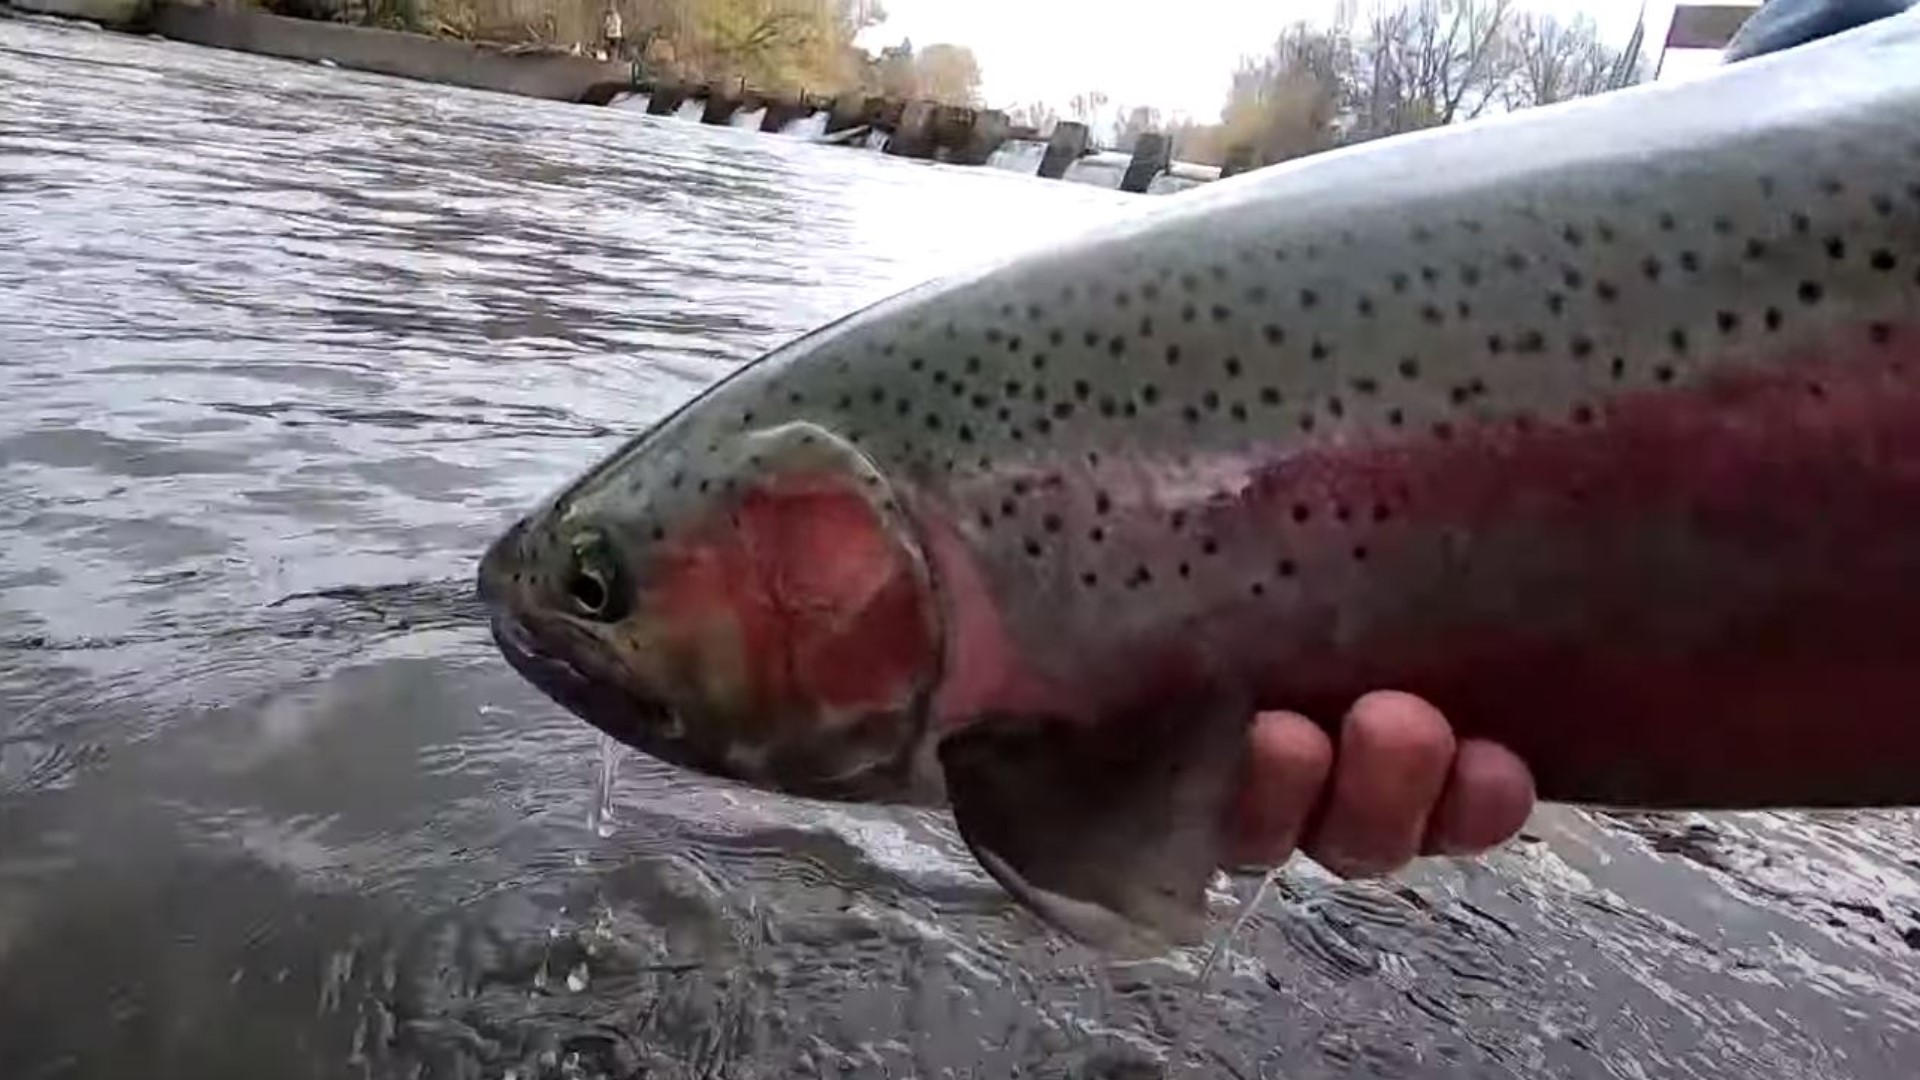 The Idaho Department of Fish and Game stocked the river with around 250 steelhead on Thursday afternoon.